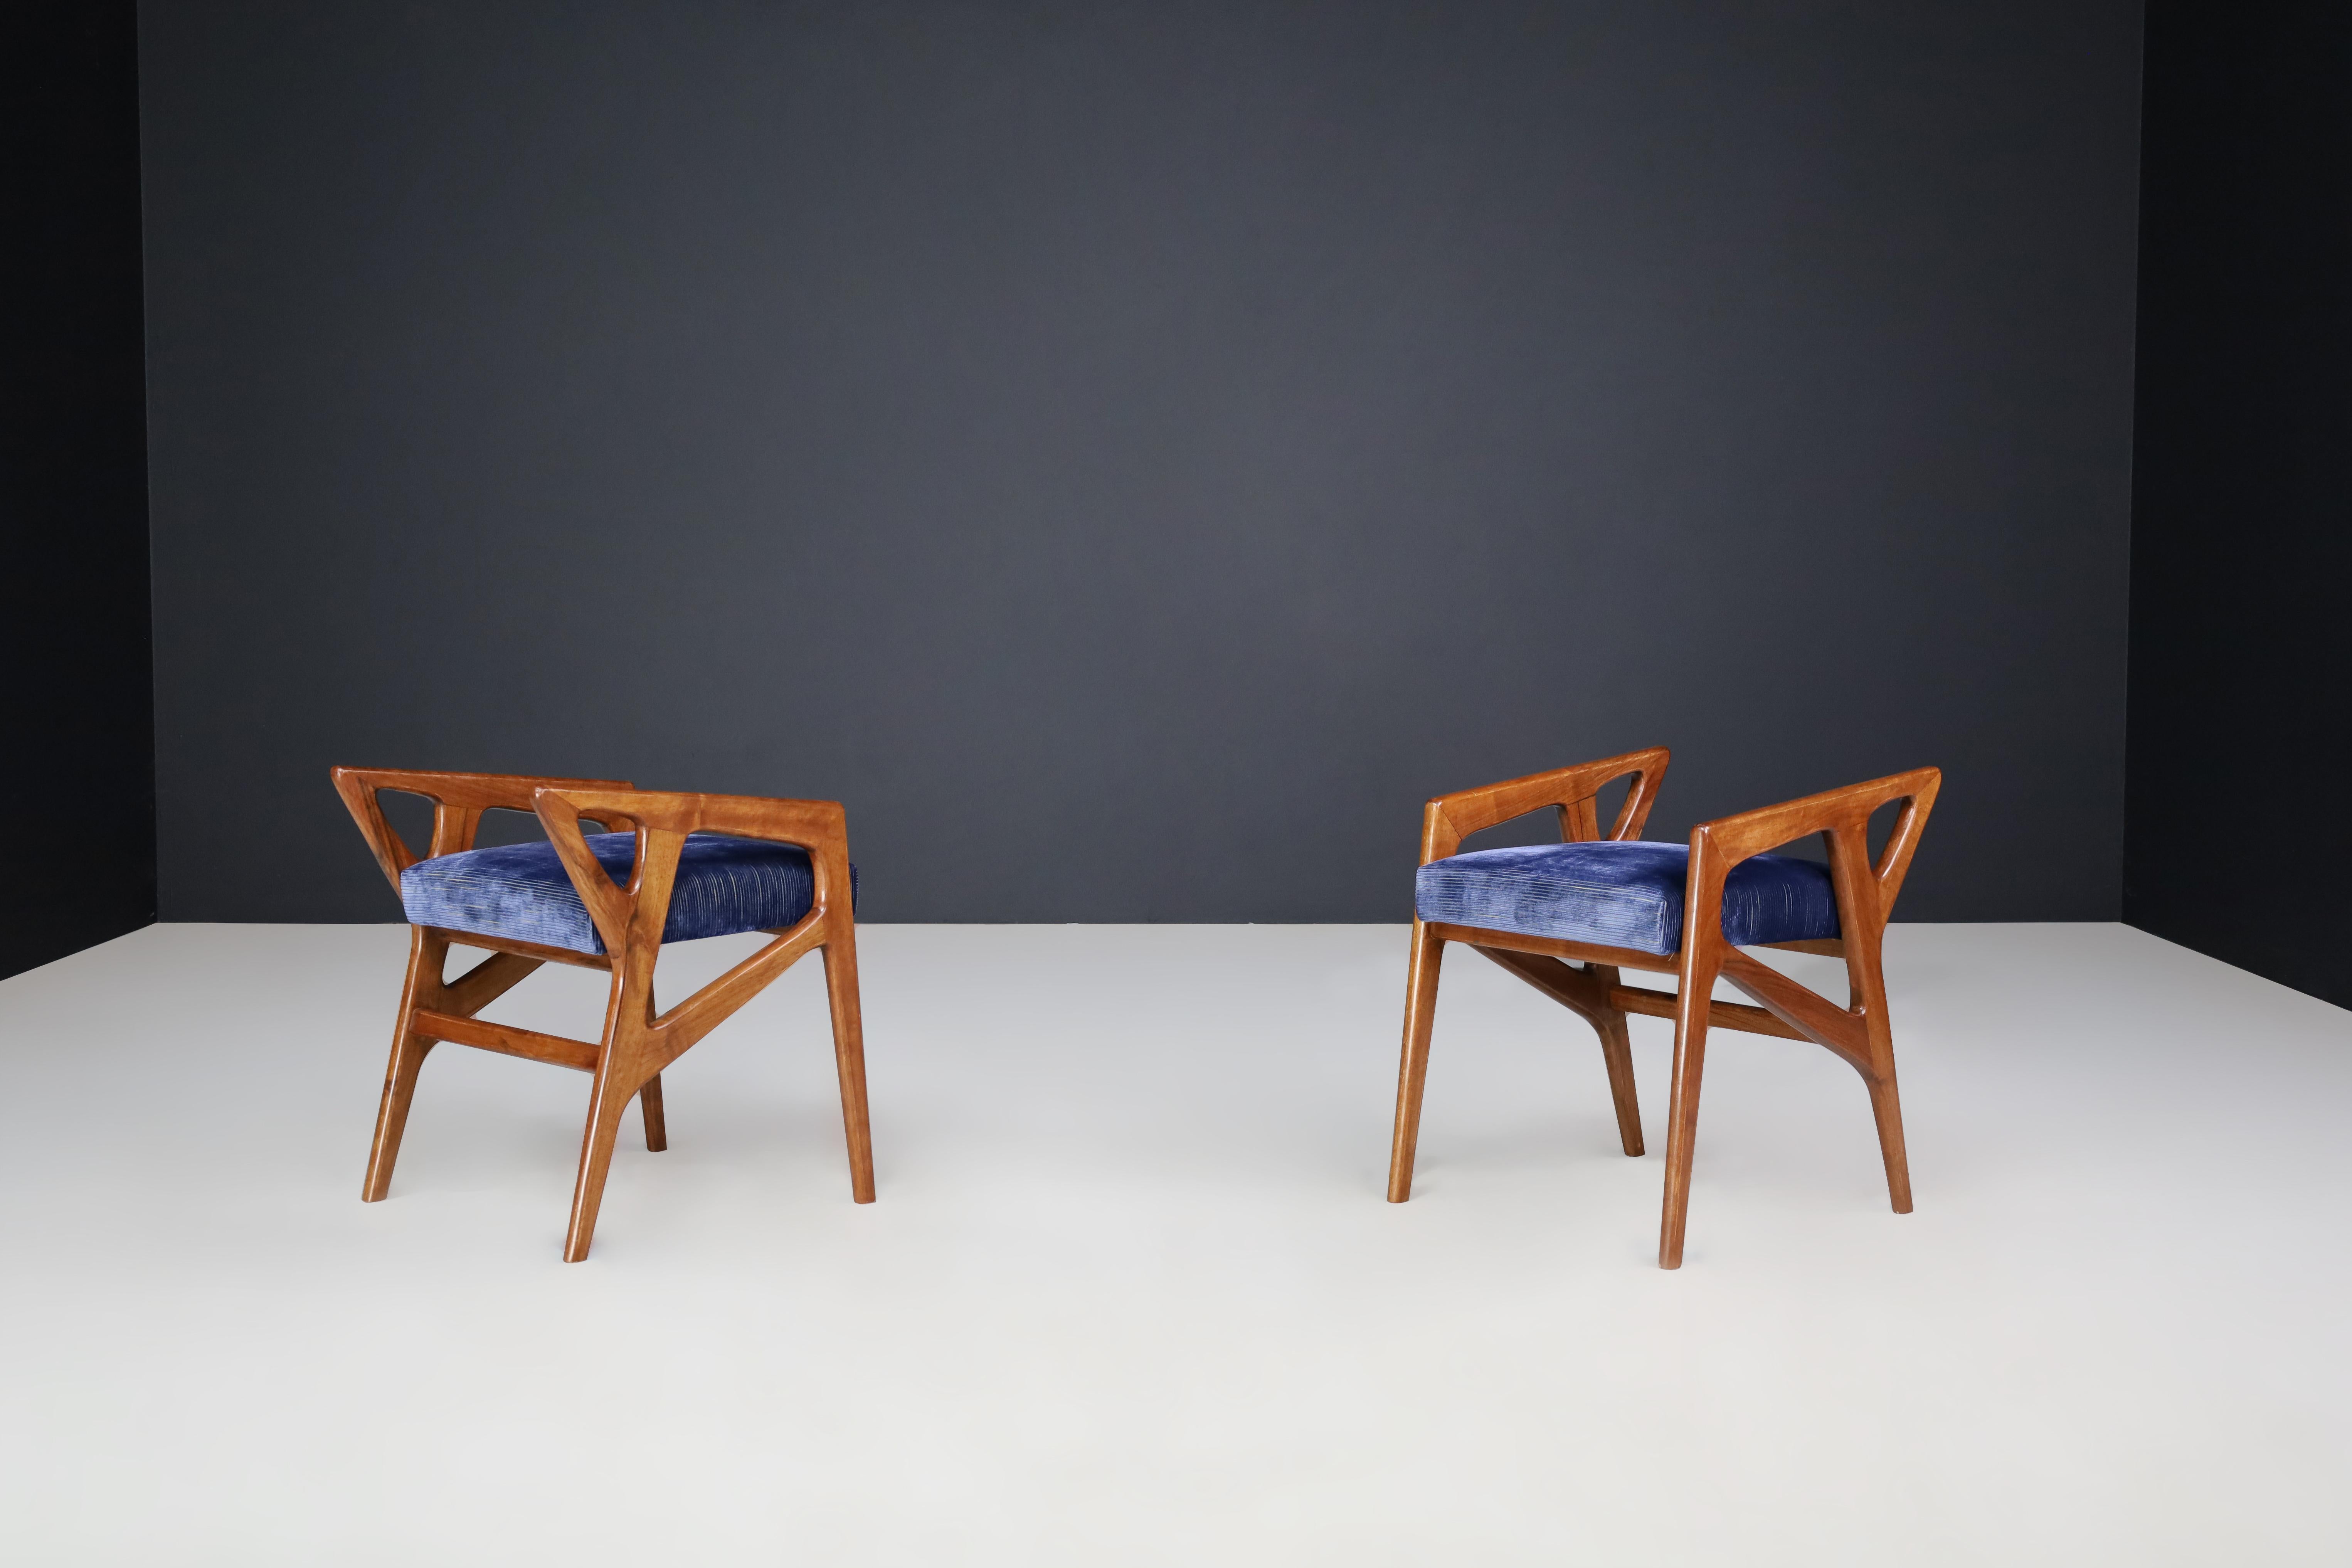 Gio Ponti for Cassina Pair of two Sculptural Stools in Walnut, Italy, 1950s.

Pair of sculptural stools from the 687 series by Italian designer Gio Ponti in the early 1950s.The structure with angular openwork forms is made of solid varnished walnut.